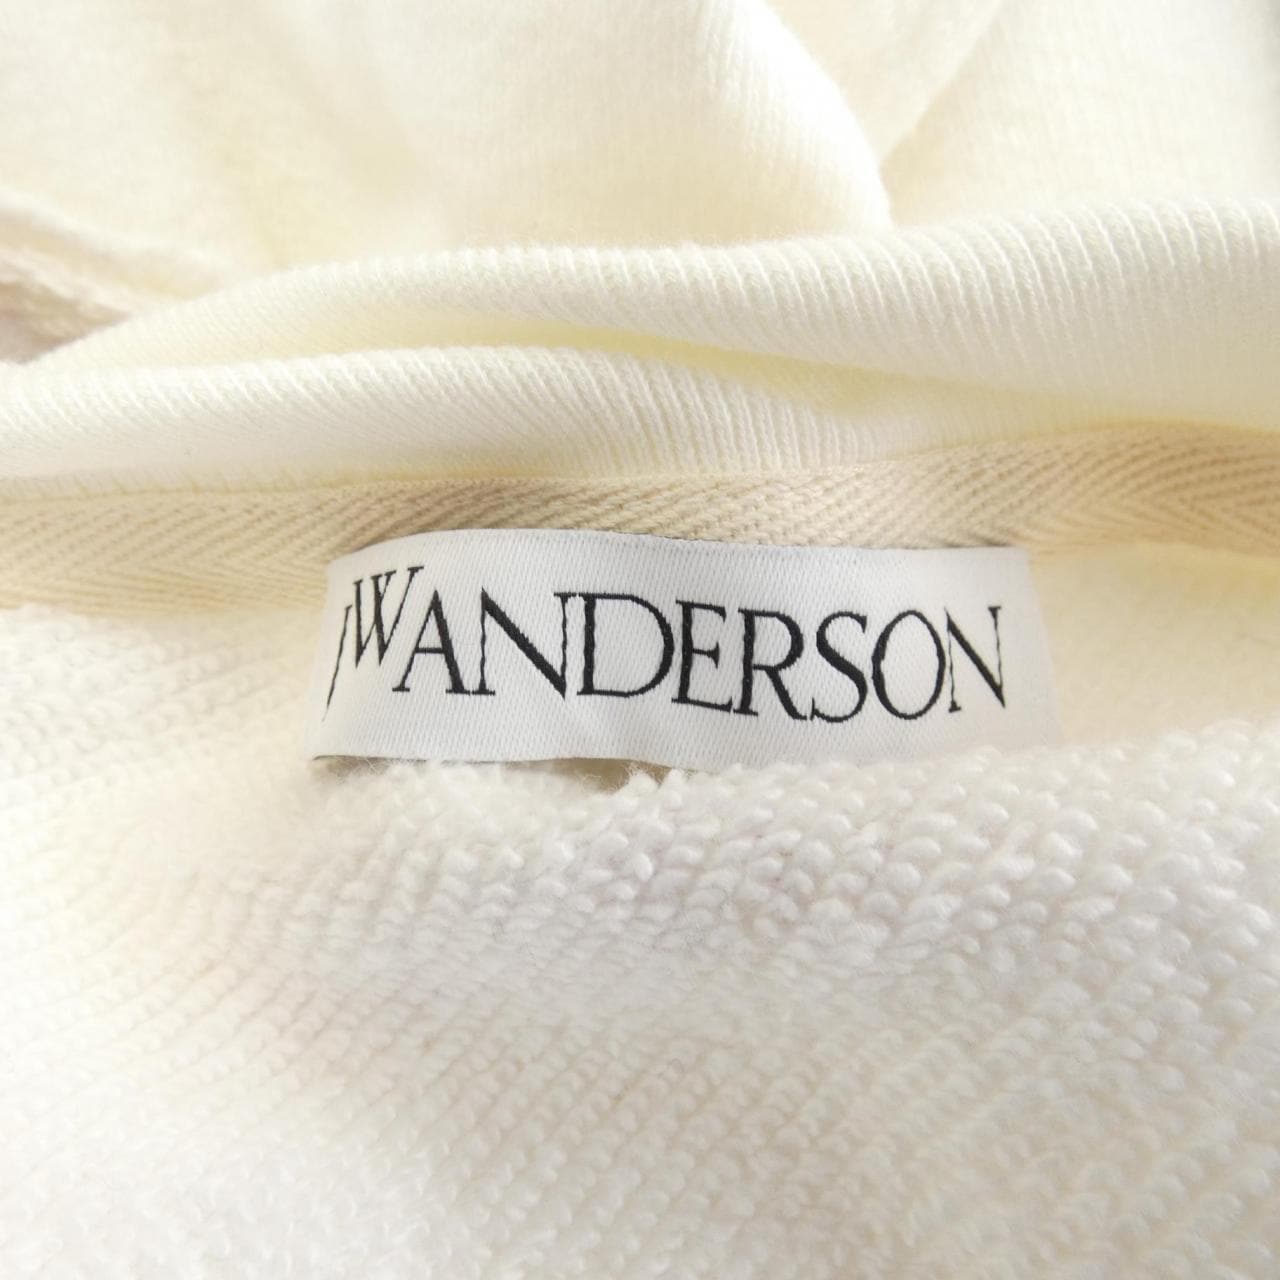 Jay Double Anderson J.W.ANDERSON Top